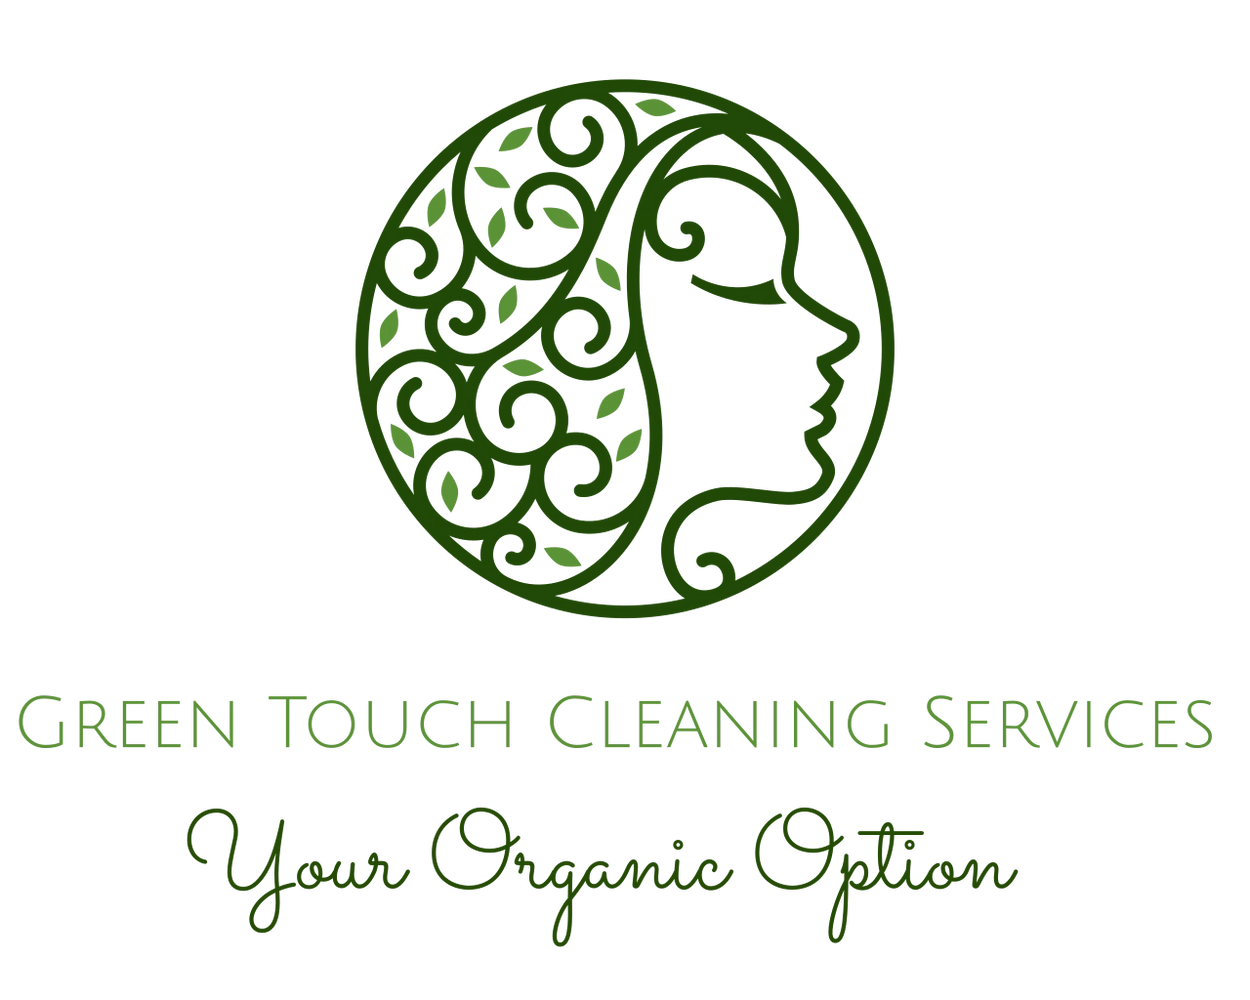 Green Touch Cleaning Services in Philadelphia, Pennsylvania